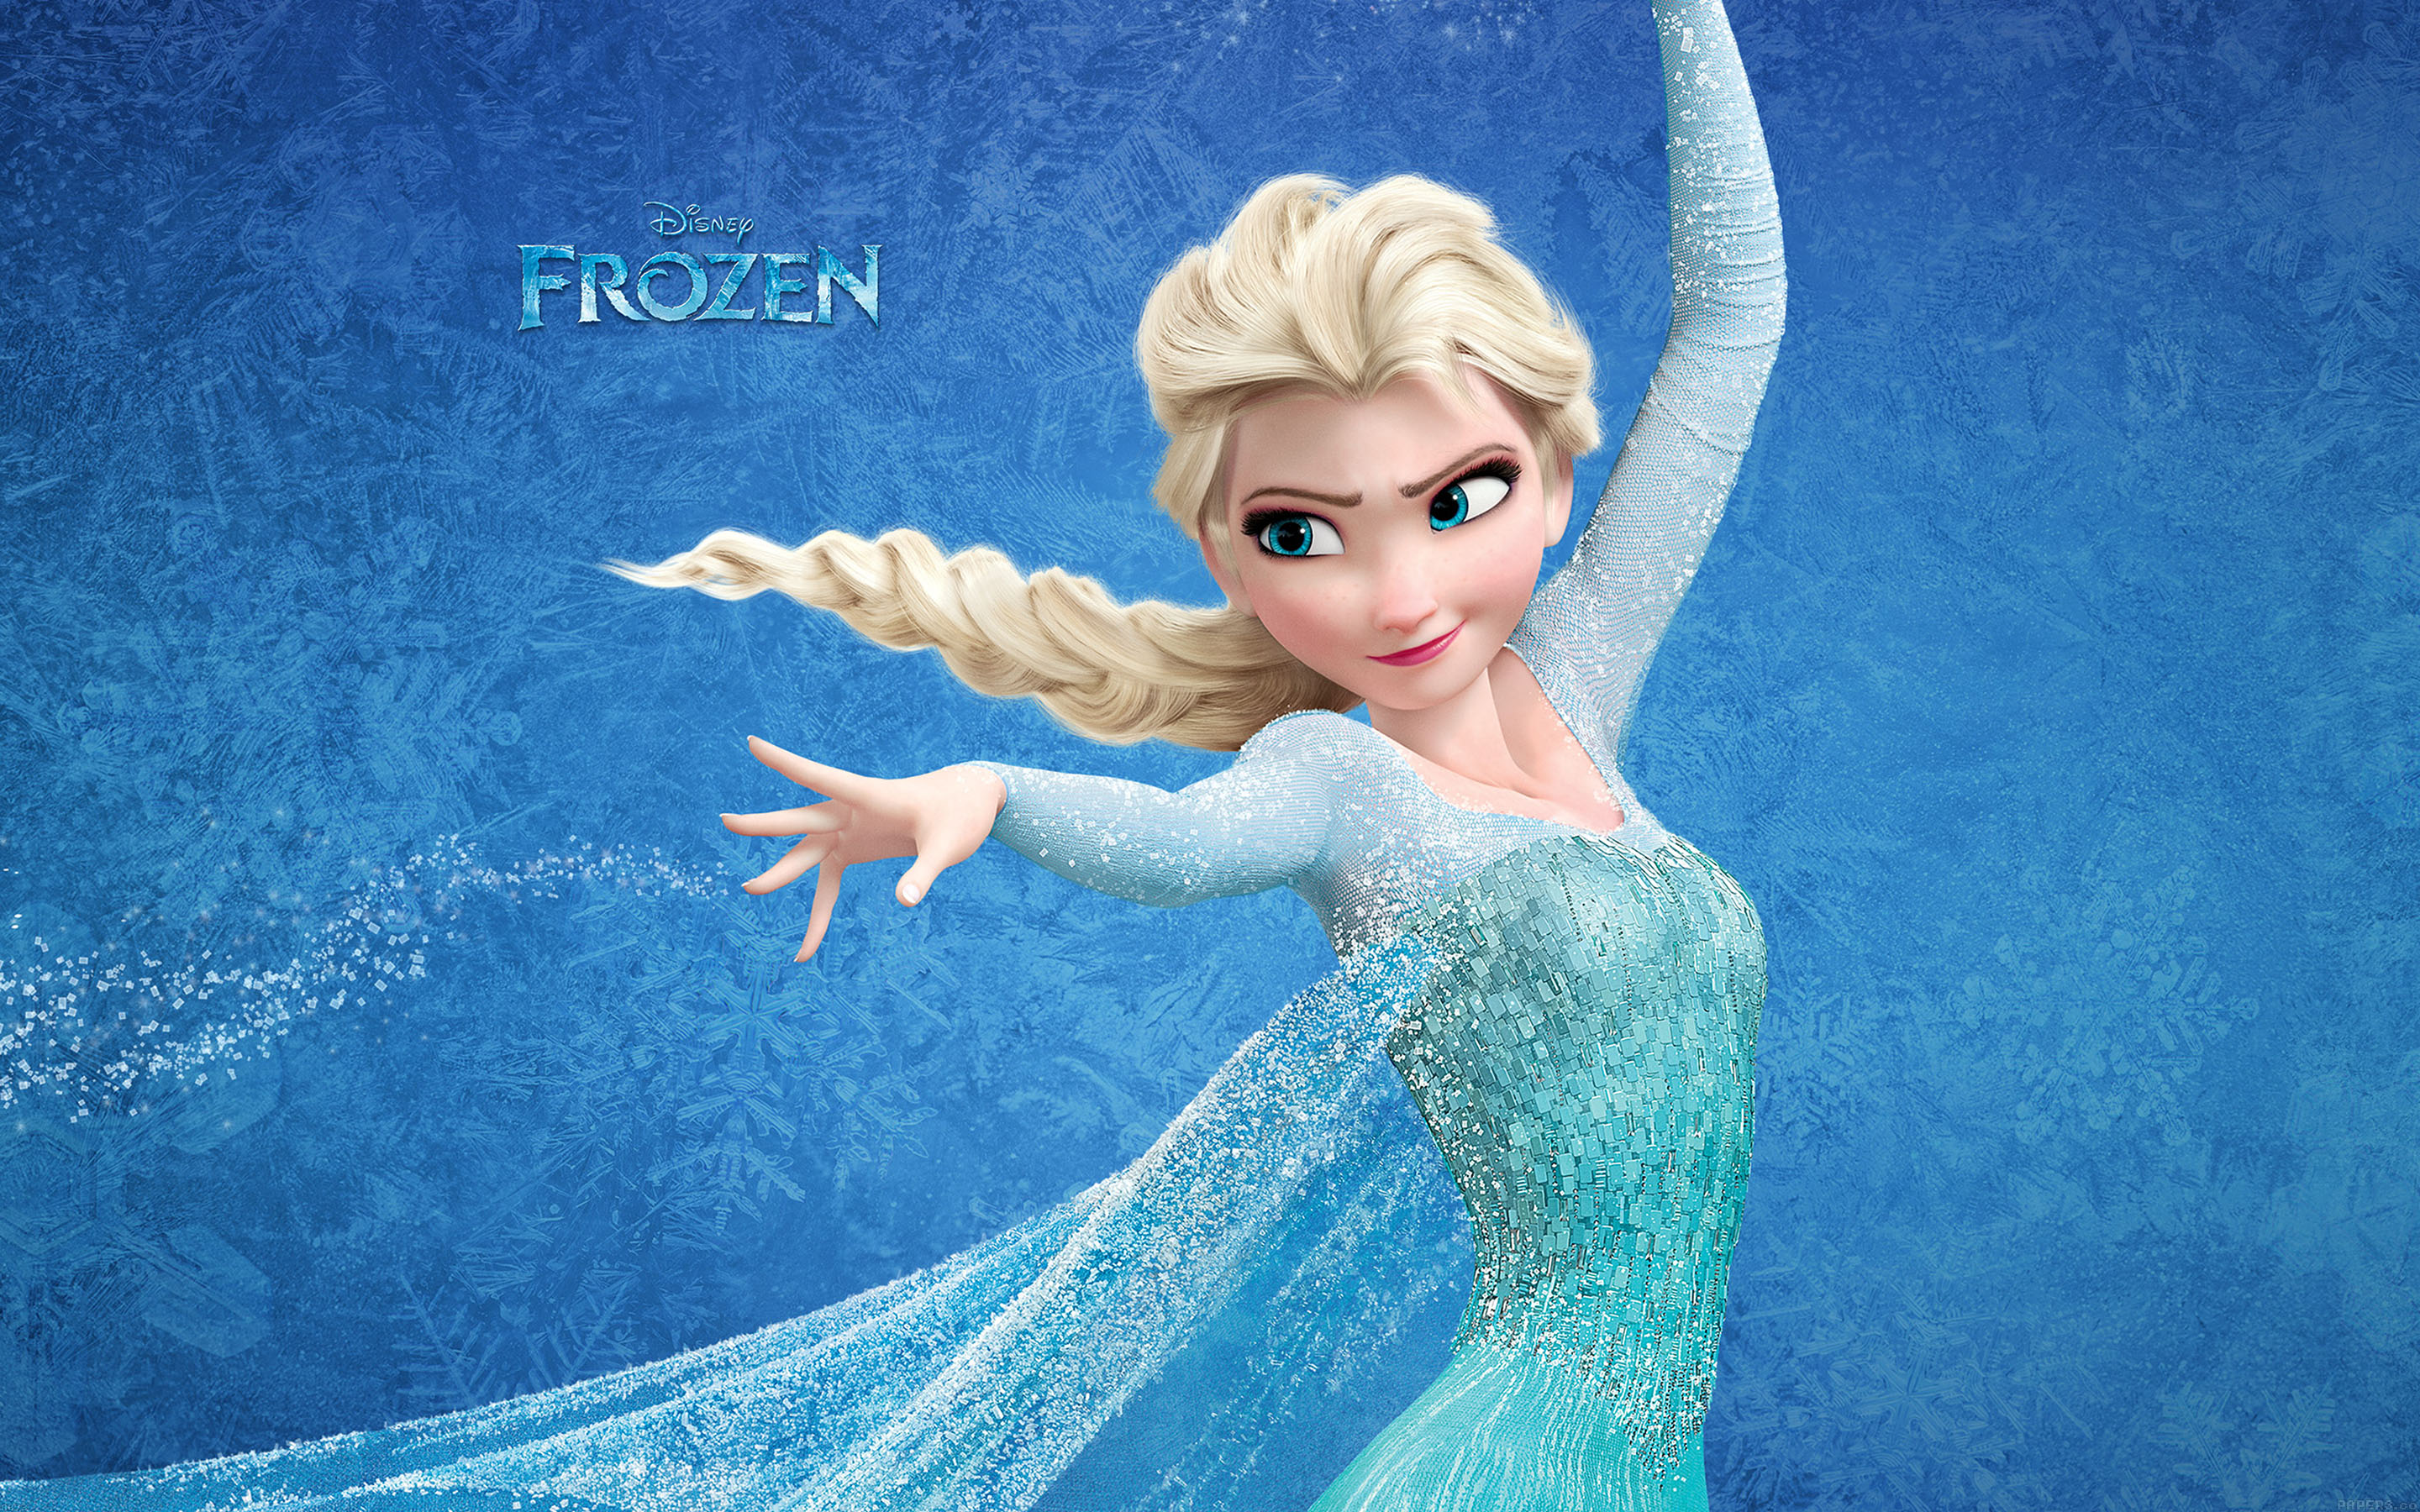 Frozen download the last version for apple